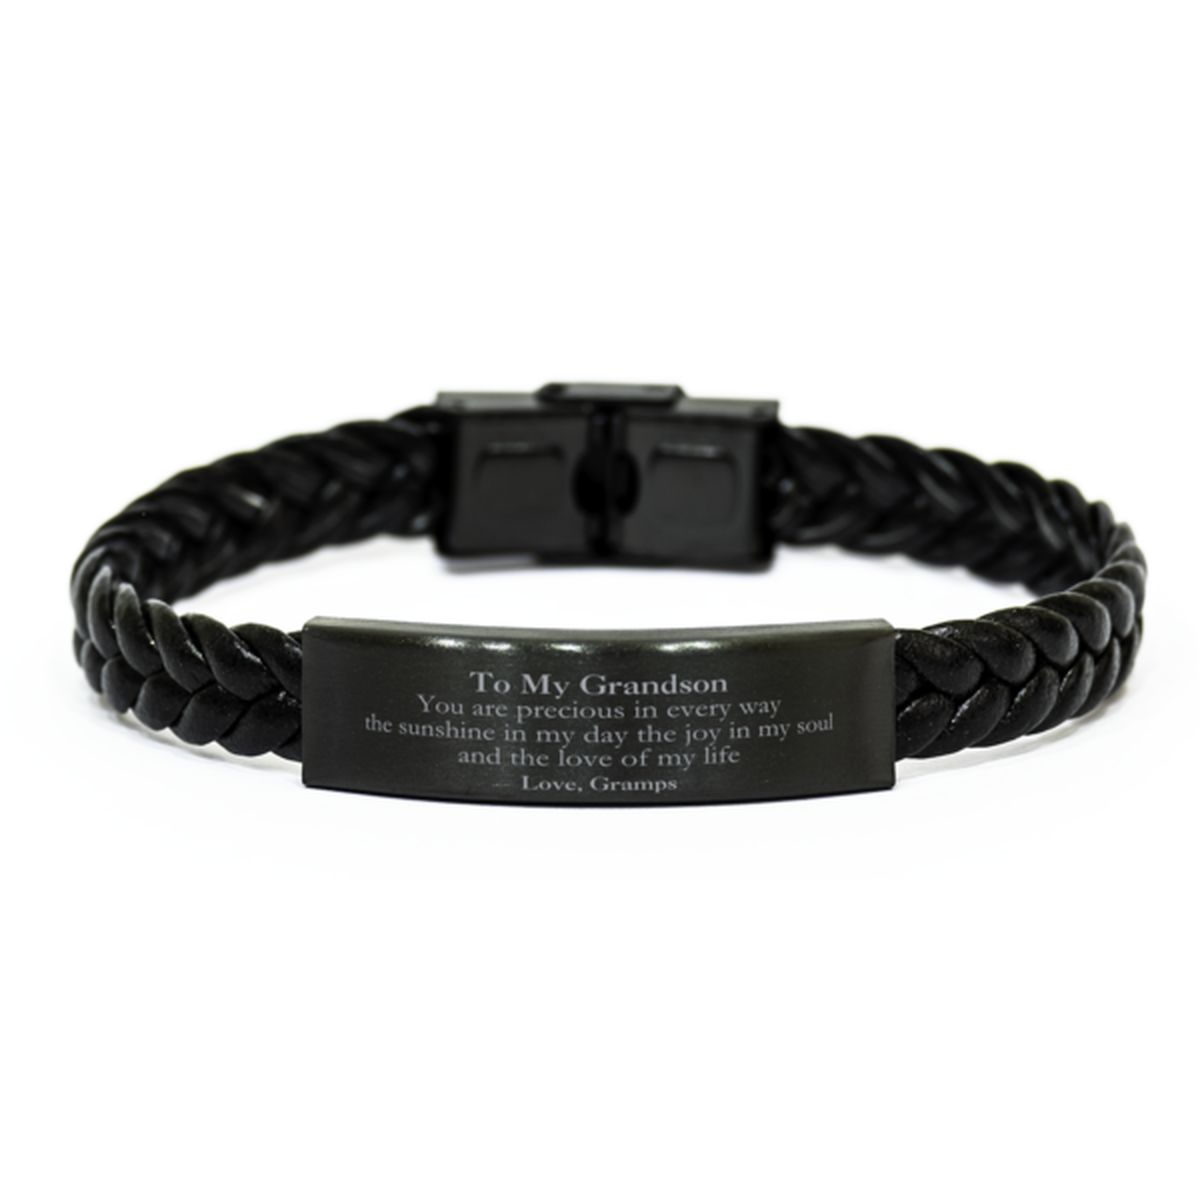 Graduation Gifts for Grandson Braided Leather Bracelet Present from Gramps, Christmas Grandson Birthday Gifts Grandson You are precious in every way the sunshine in my day. Love, Gramps